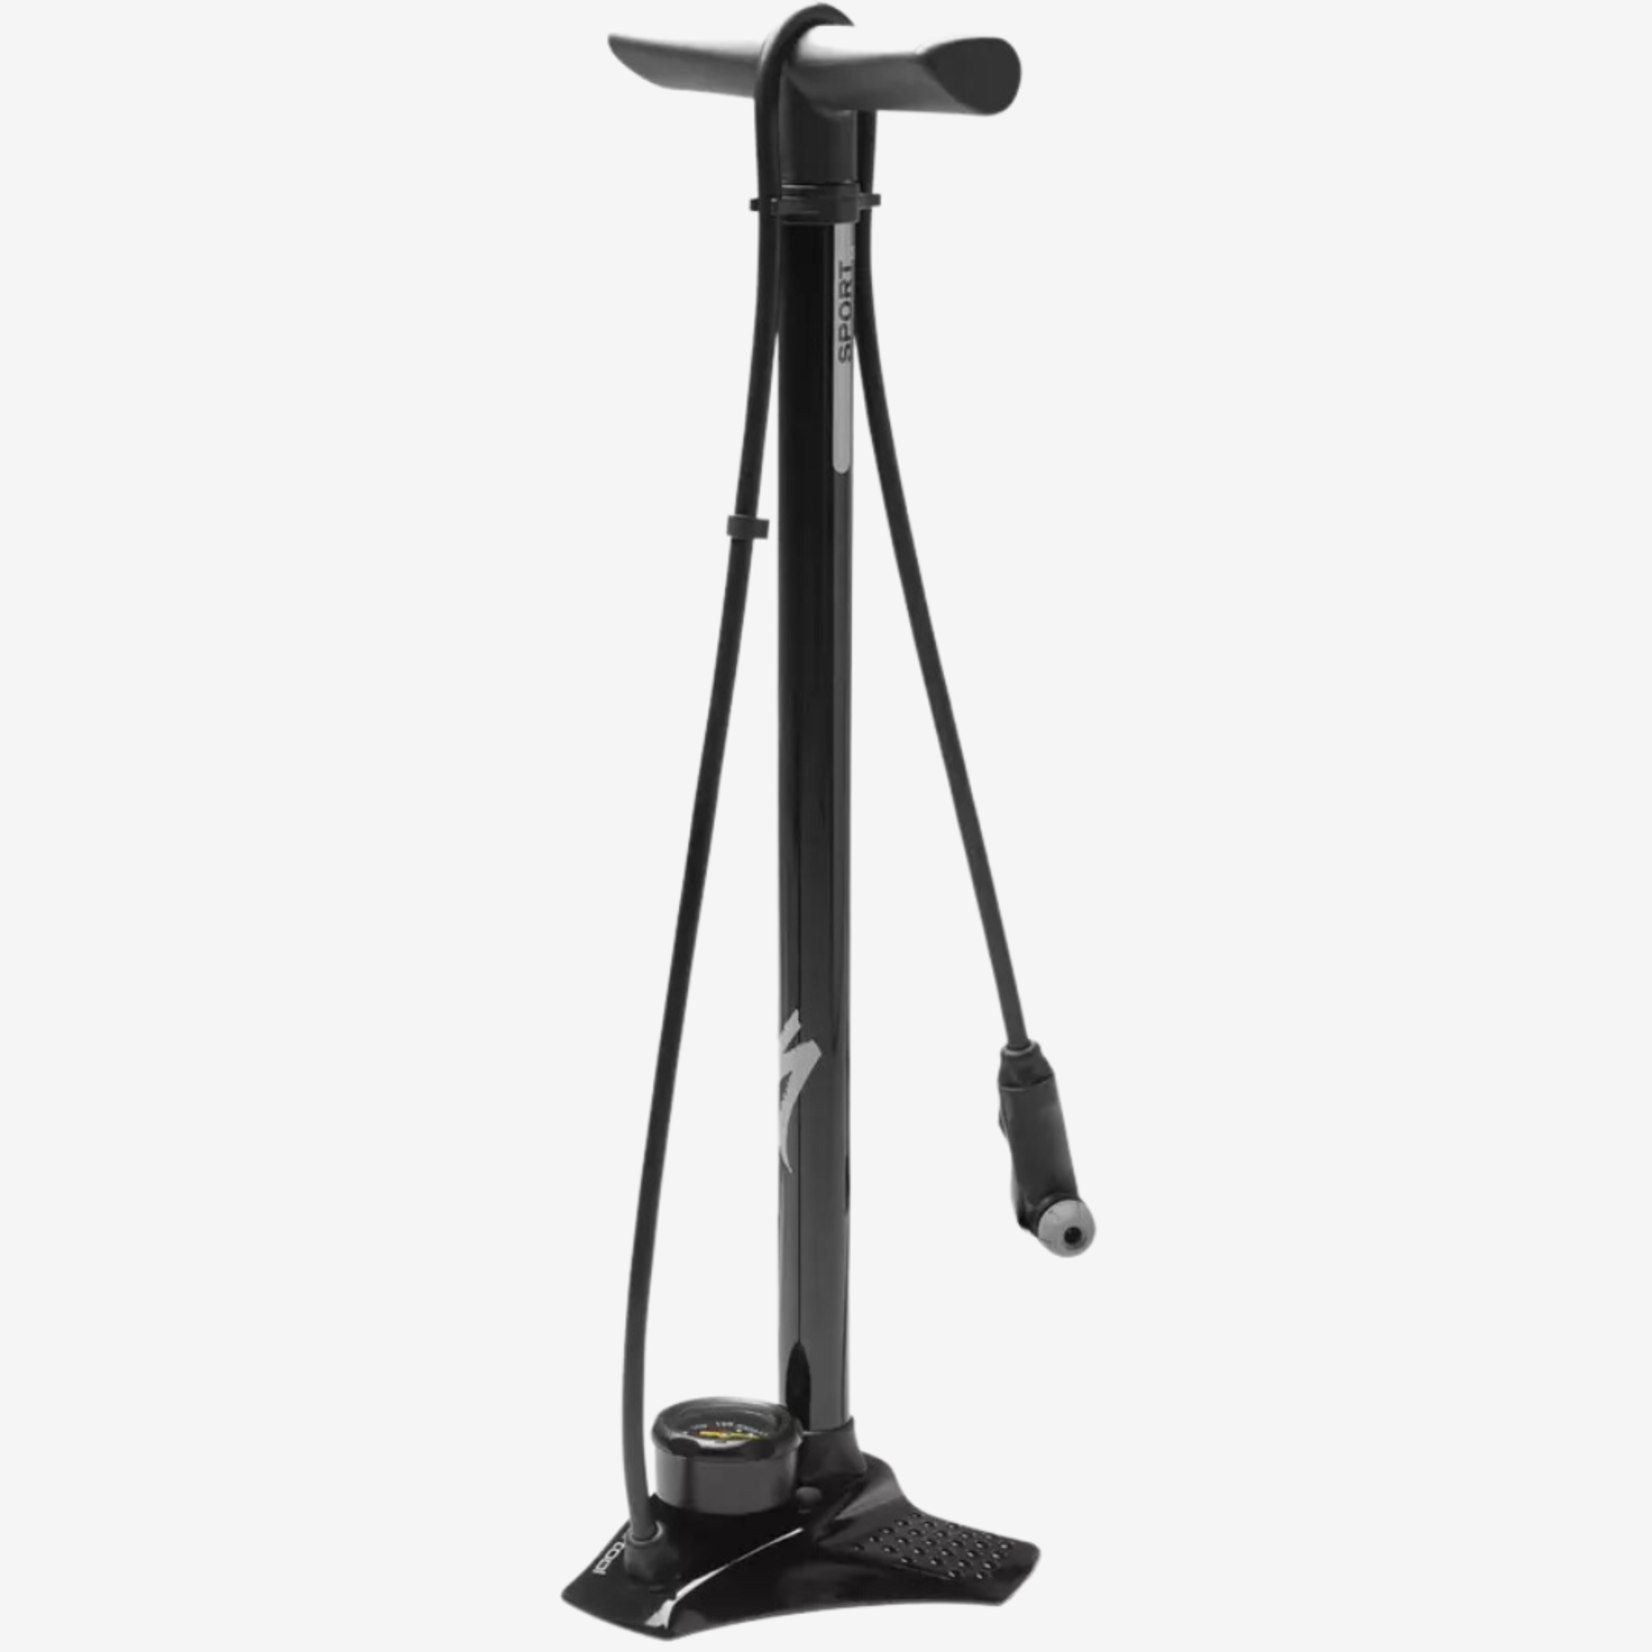 SPECIALIZED AIR TOOL SPORT FLOOR PUMP